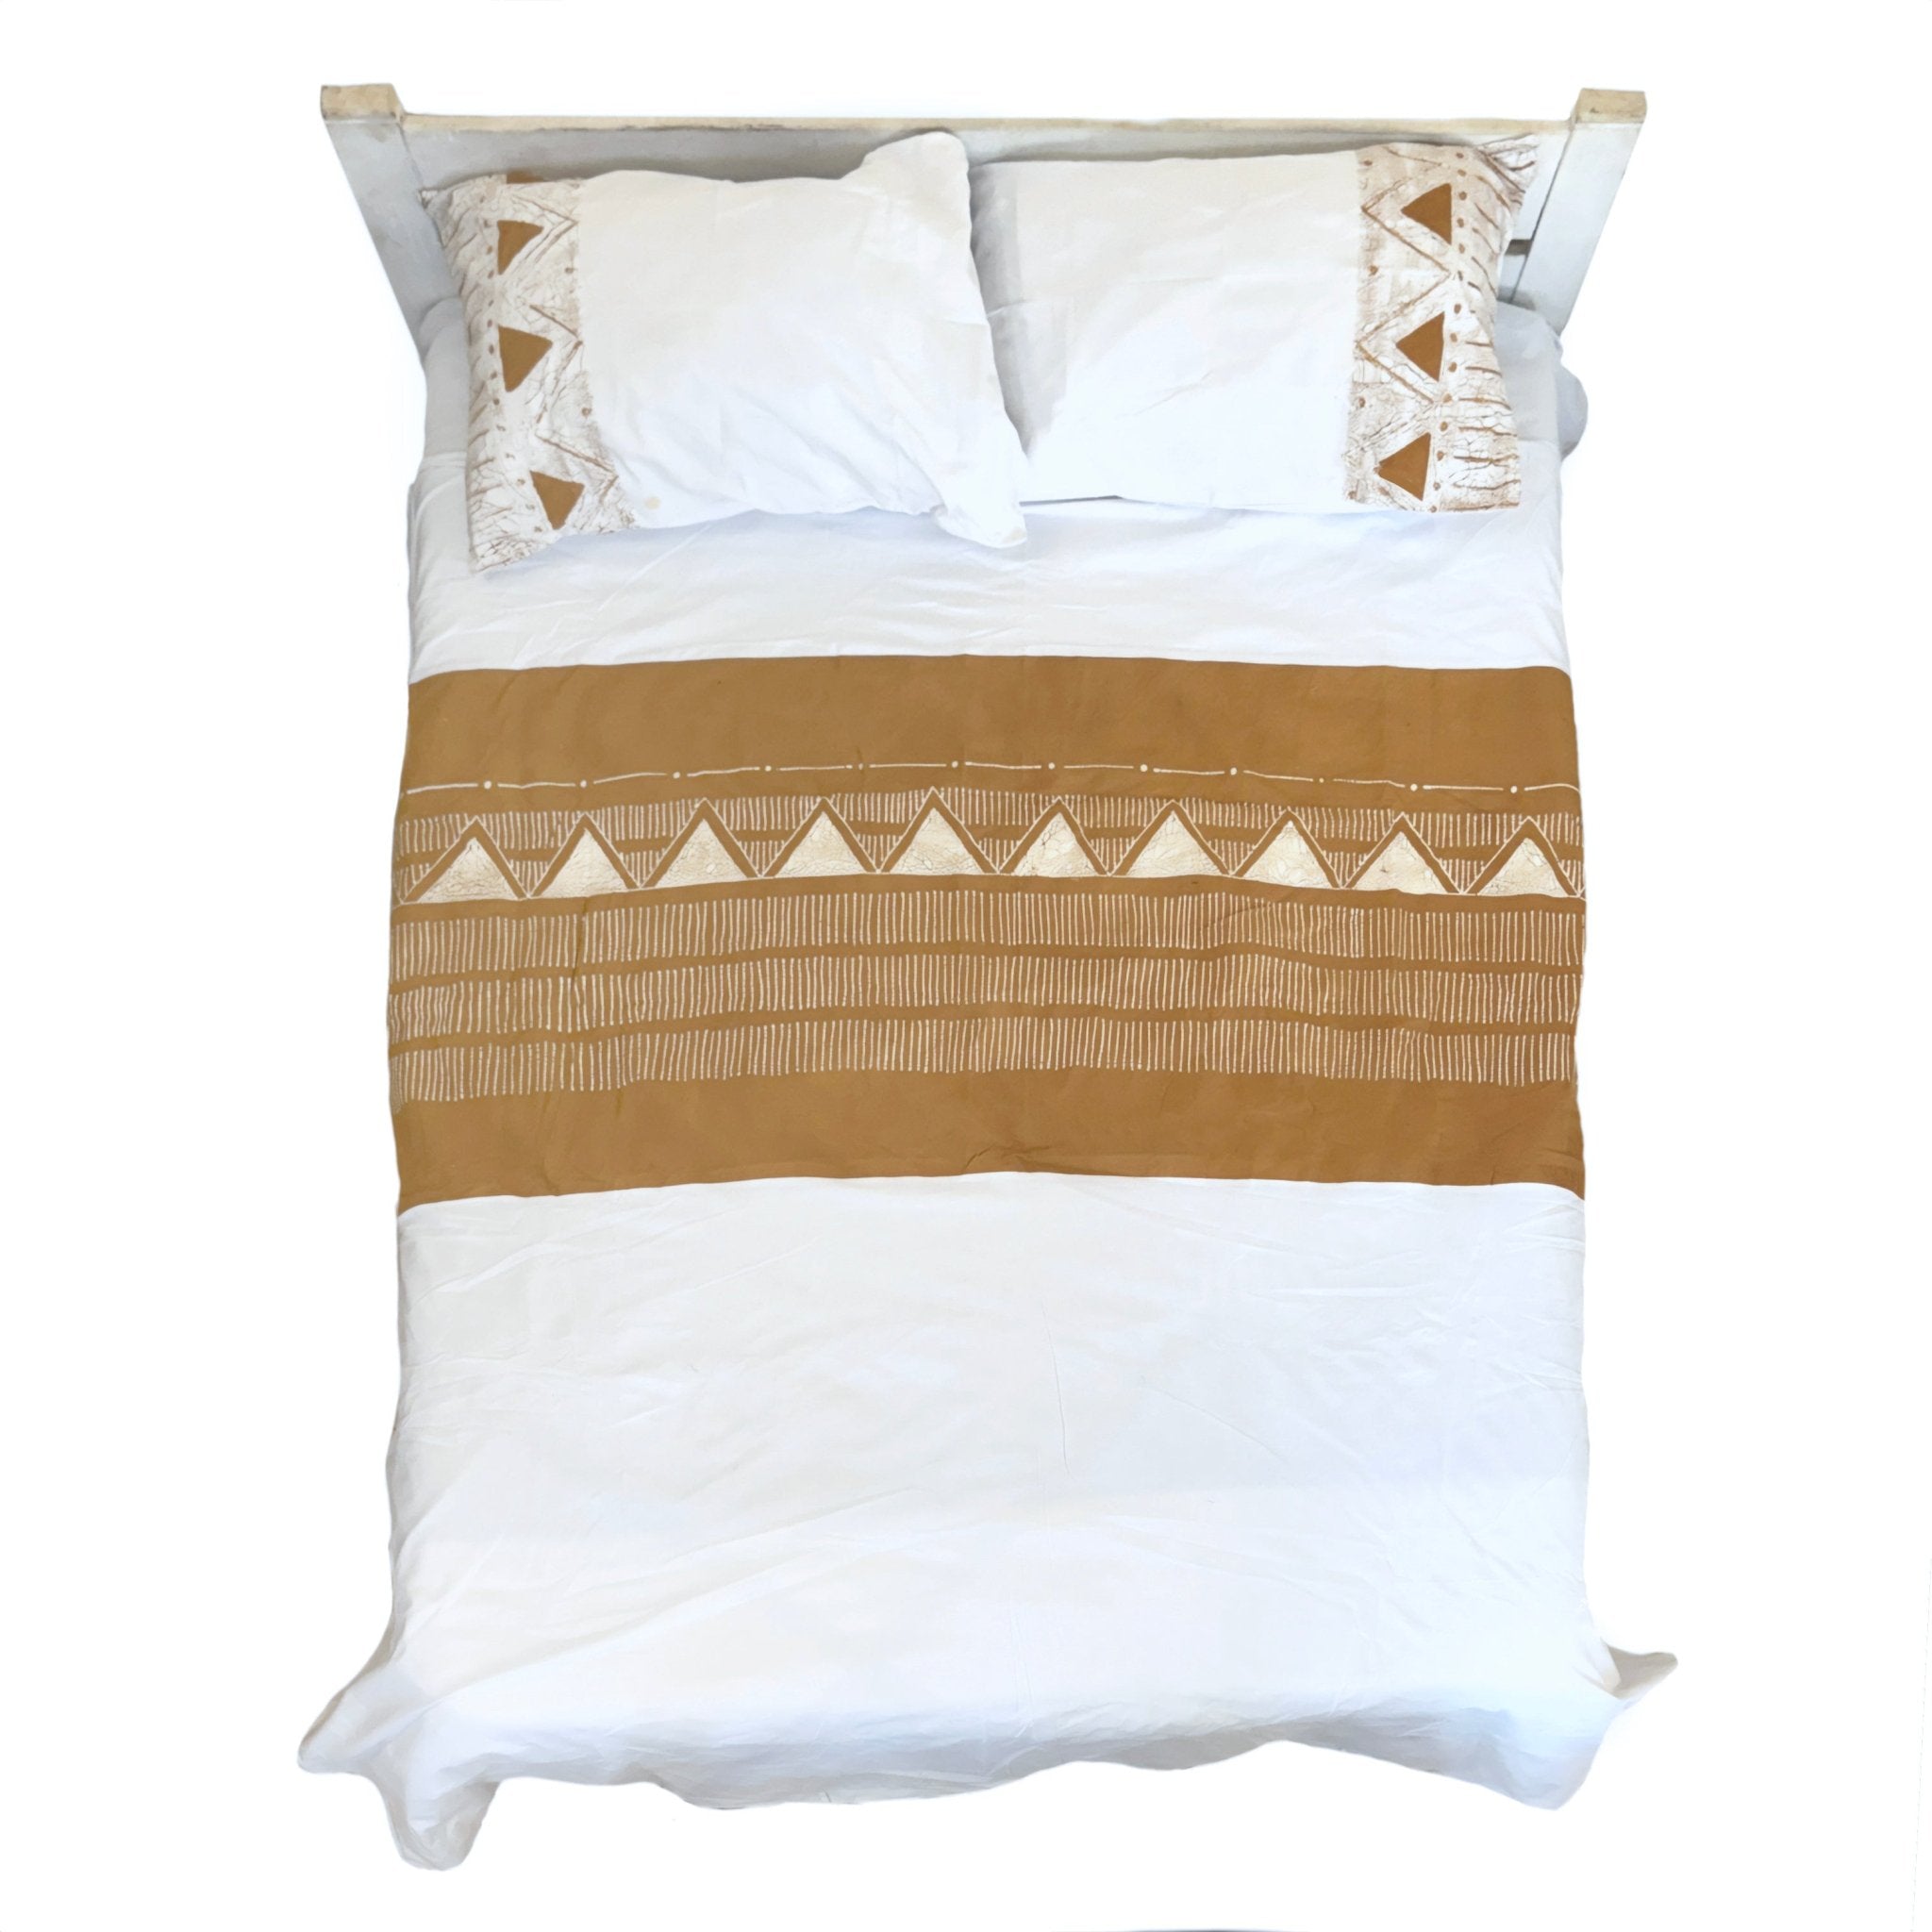 Sustinably made on organic cotton bedding set for your home with mustard yellow mud cloth design.